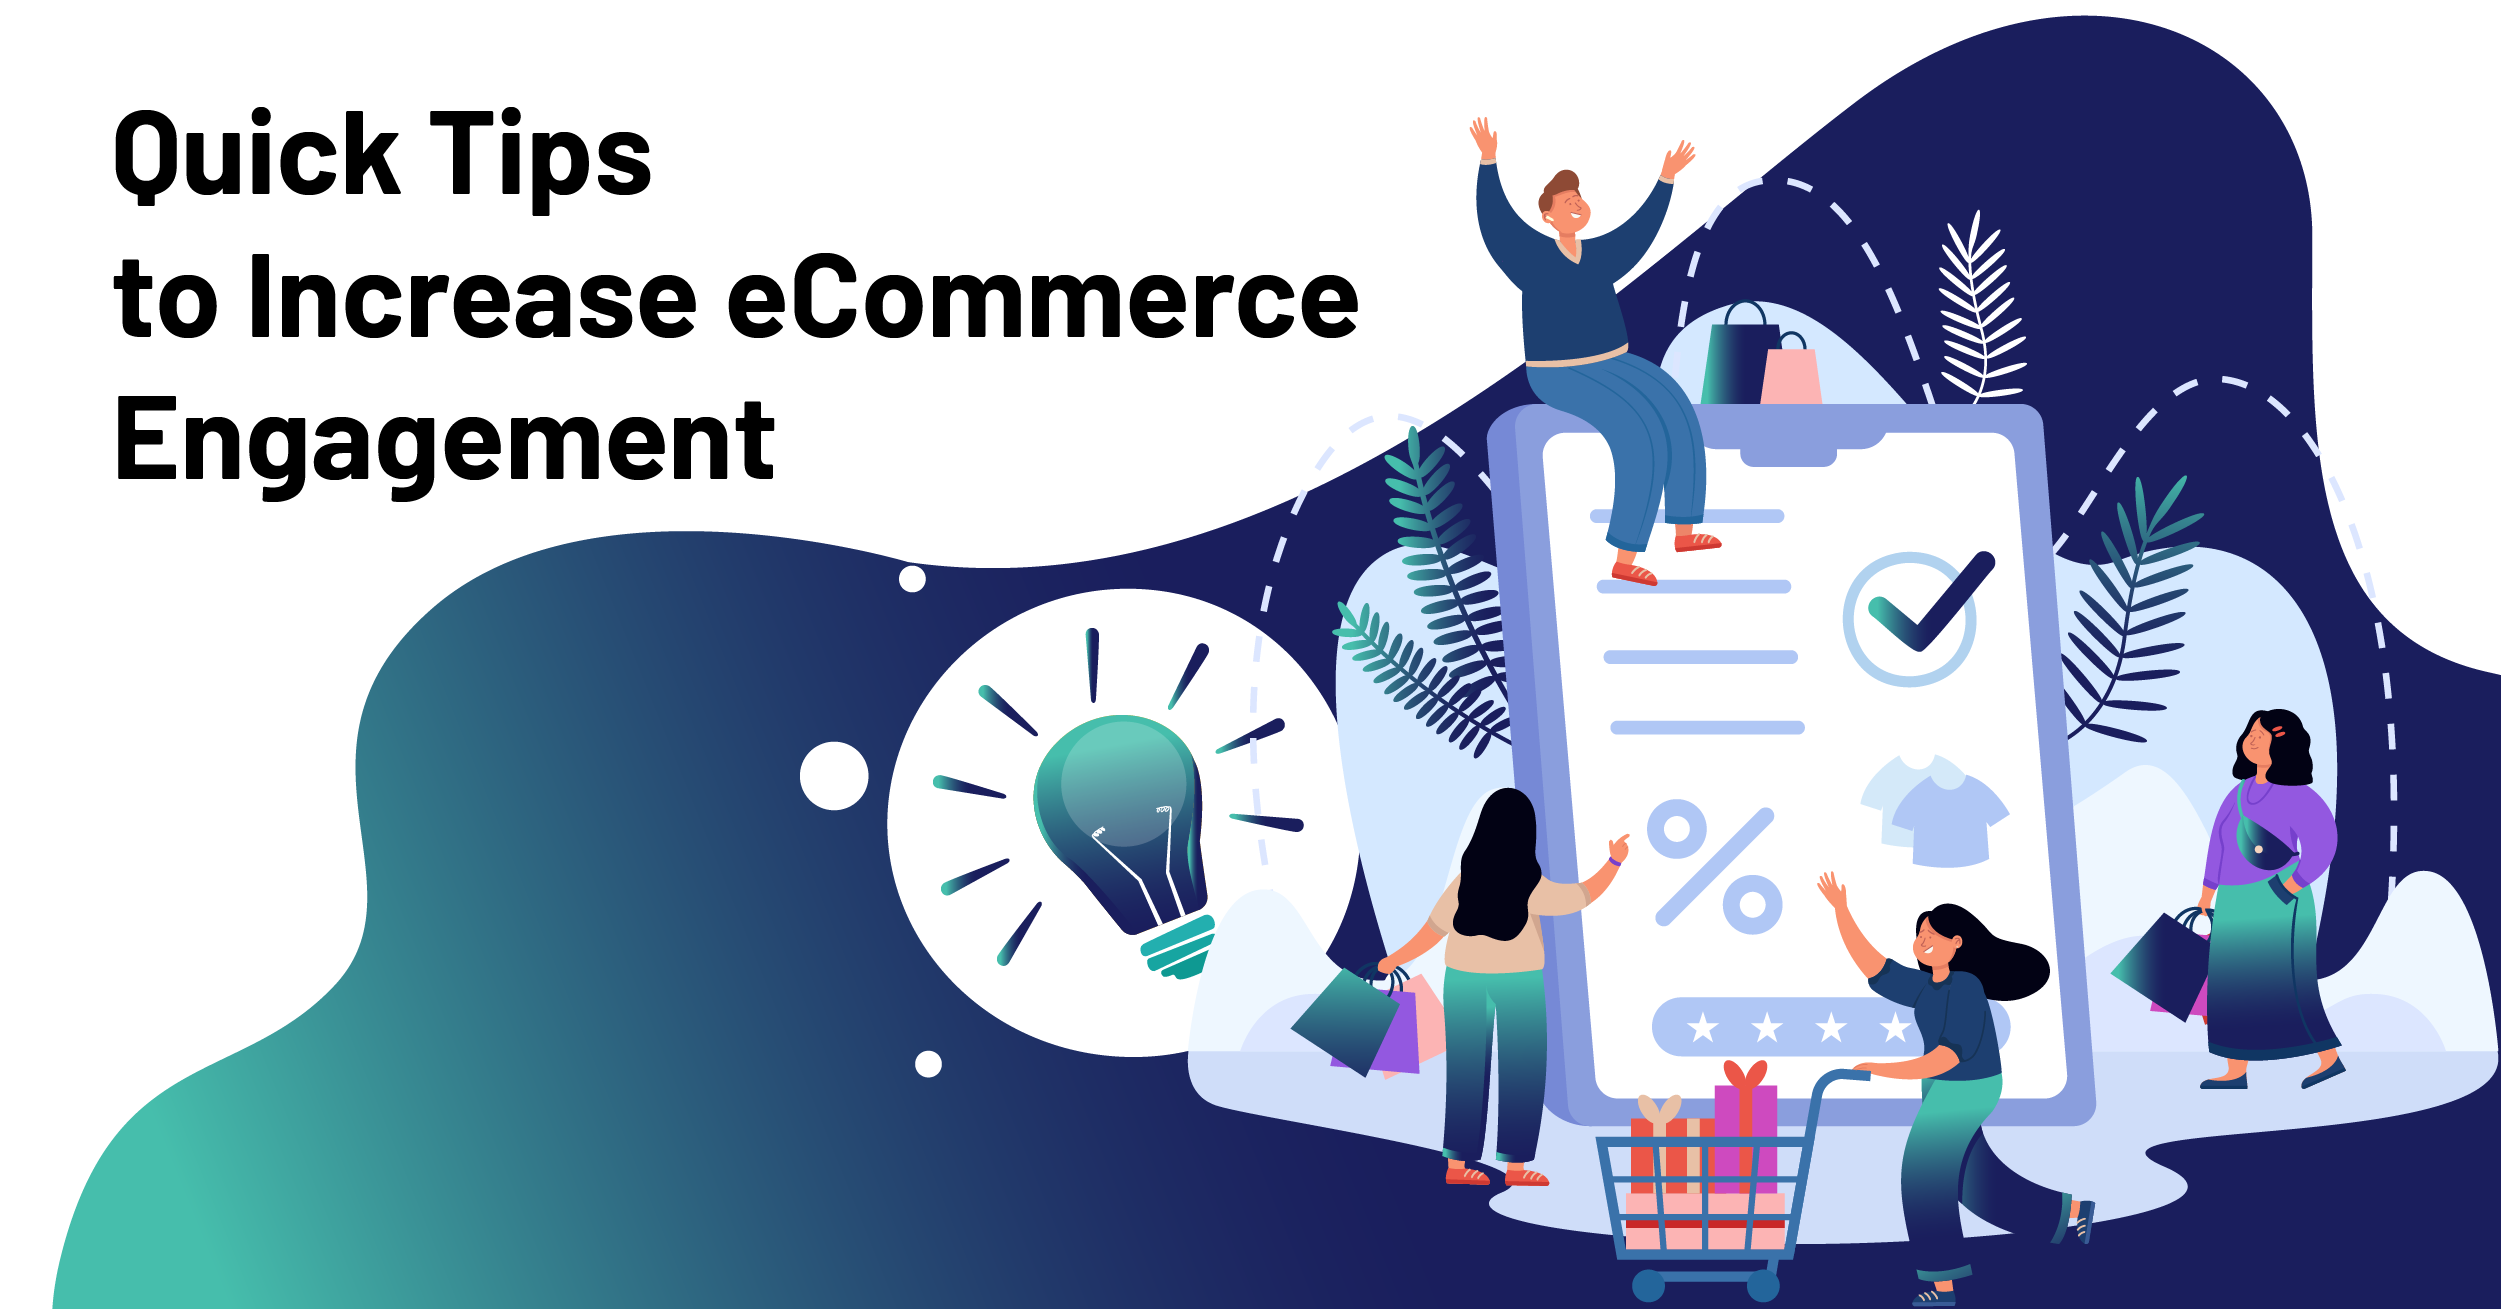 Quick Tips to Increase eCommerce Engagement